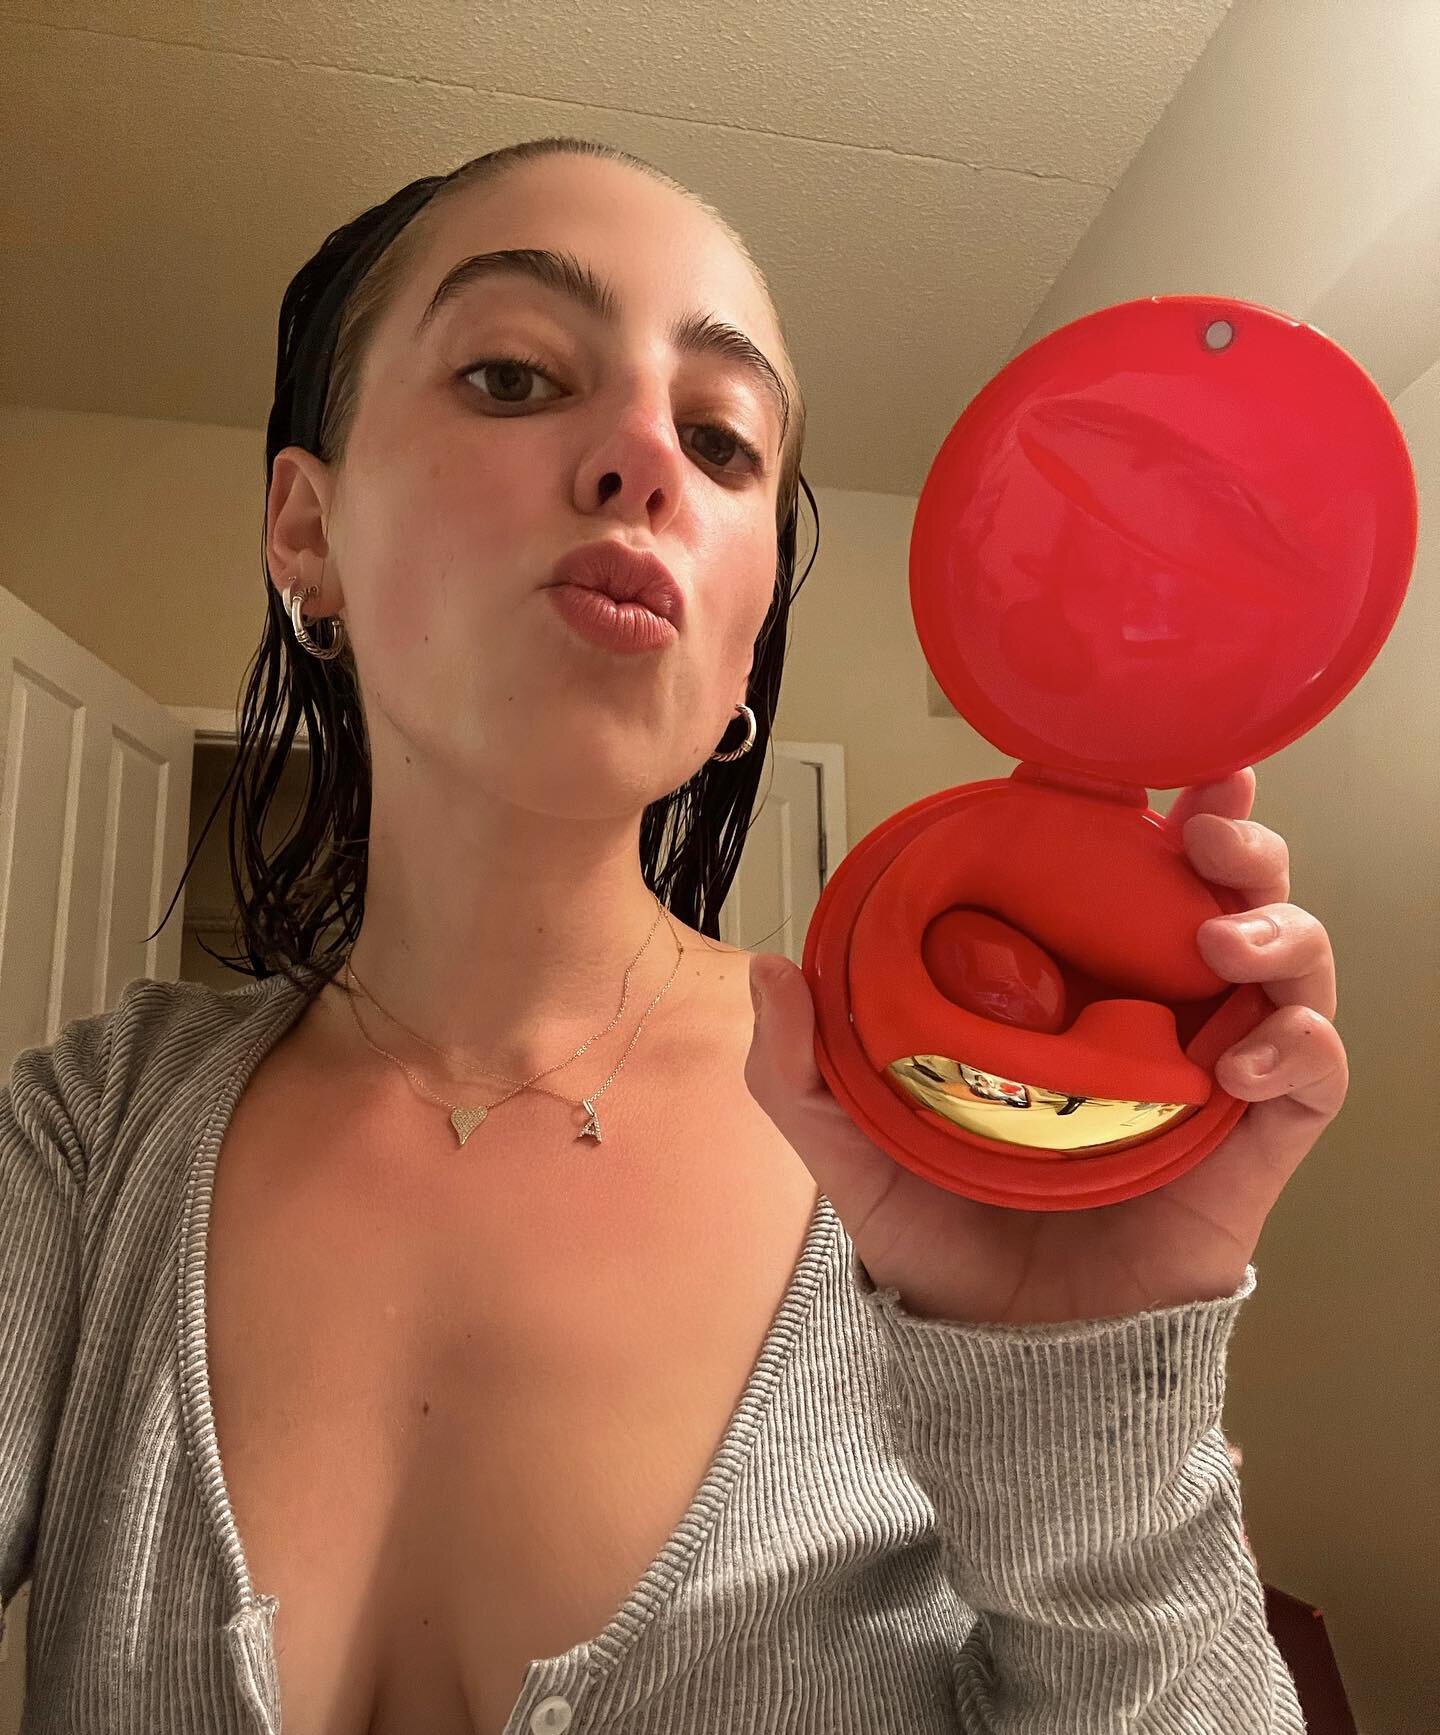 Fresh out of the shower and had to reach for my favorite toy. @bellesaco is hooking you all up with a free vibrator or giftcard! Hit up the link in my bio asap xx #partner